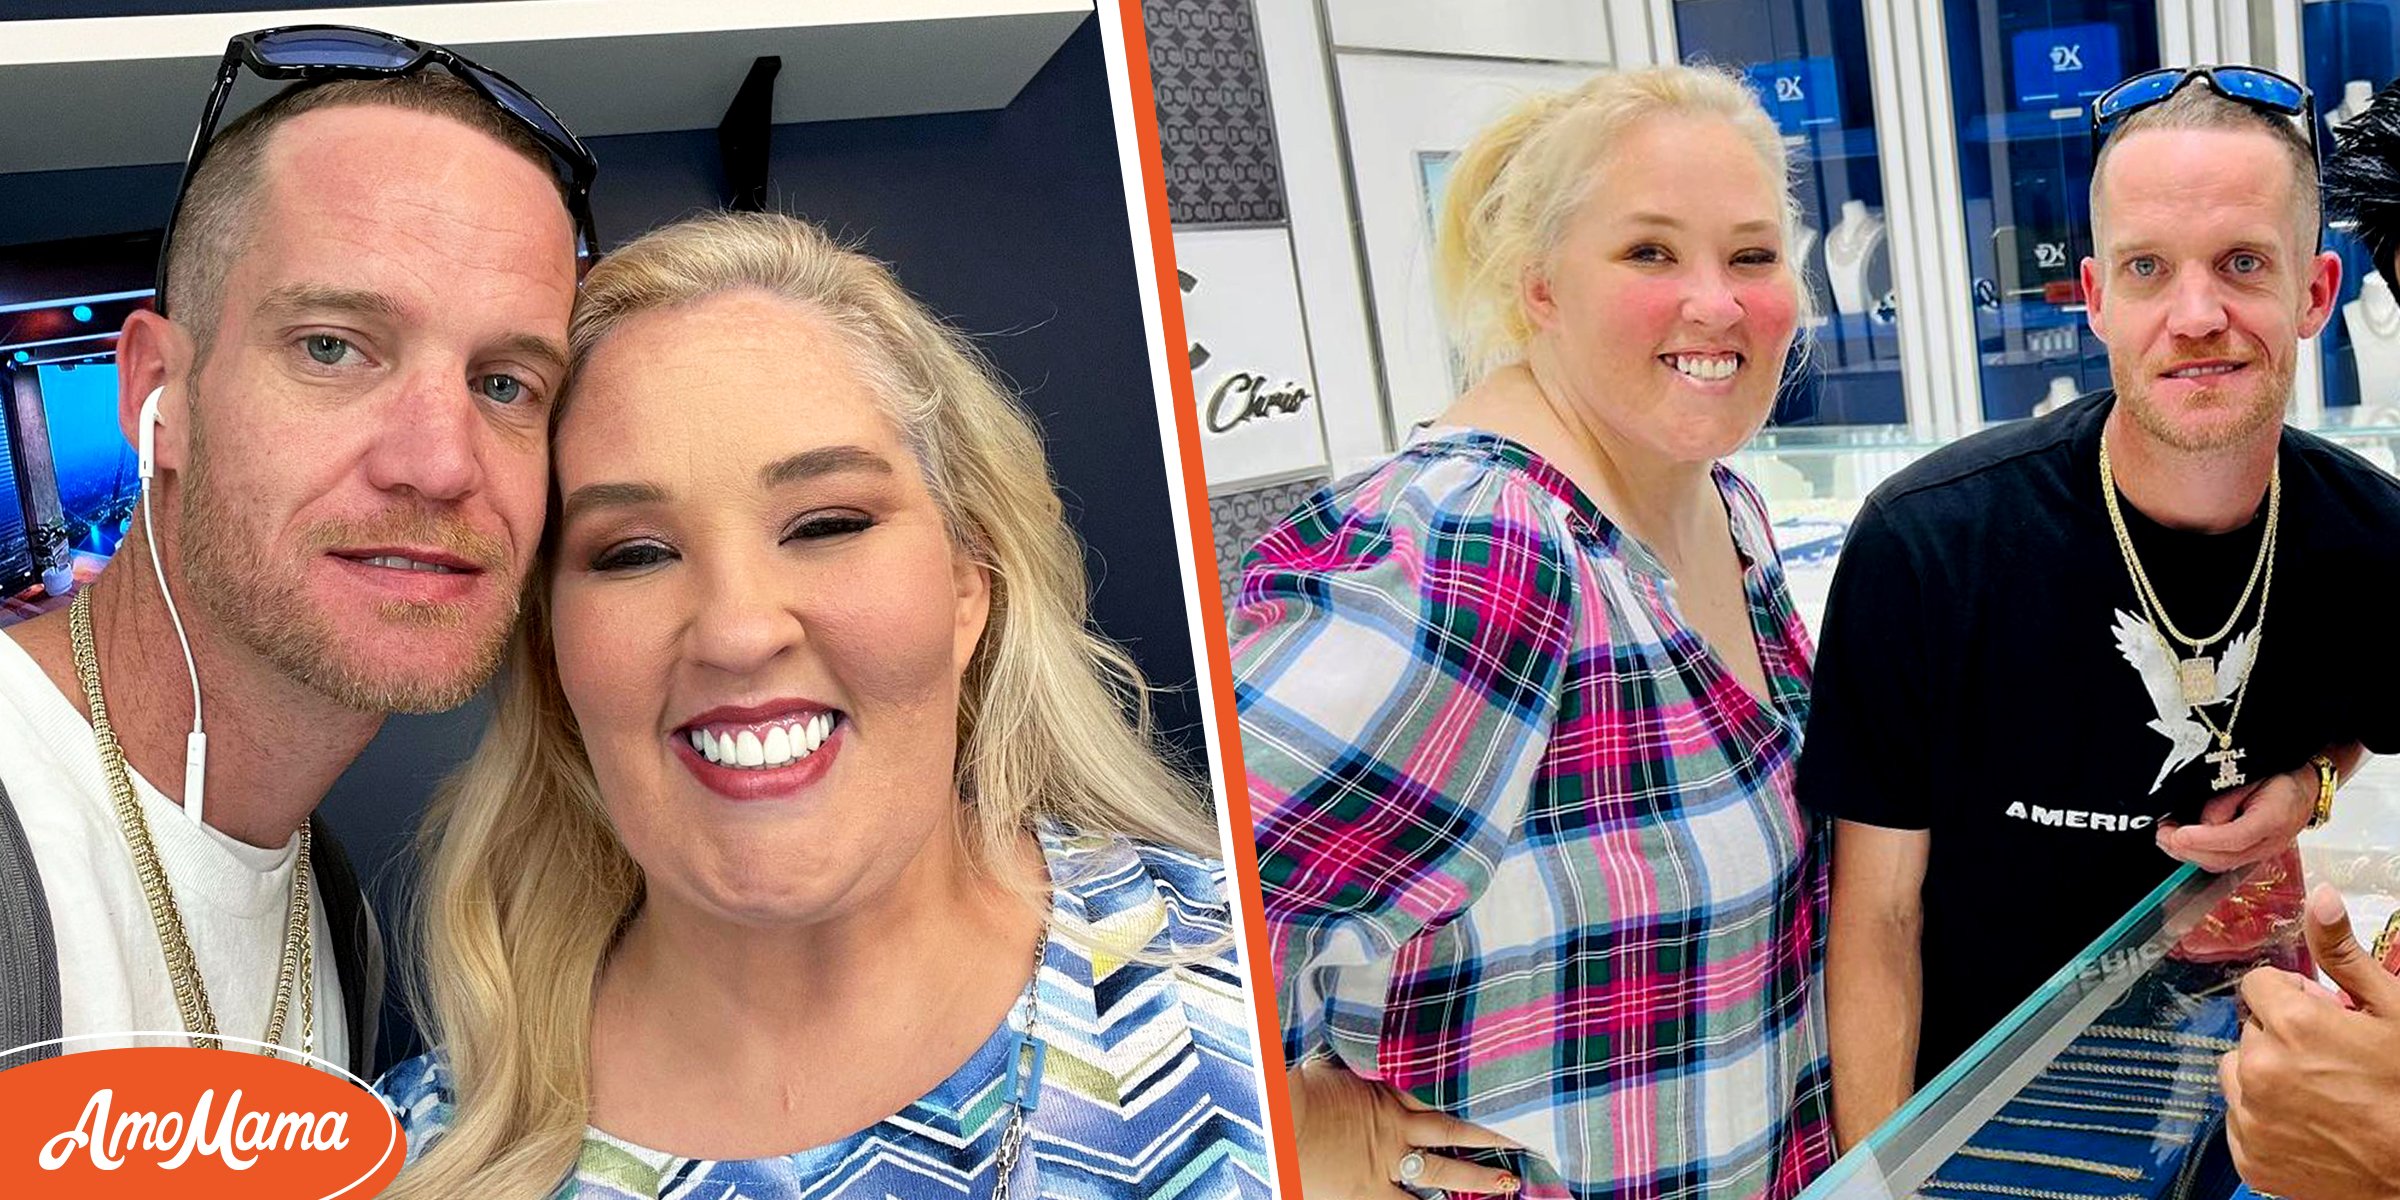 Who Is Mama June’s Husband? The Reality Star Secretly Married Her